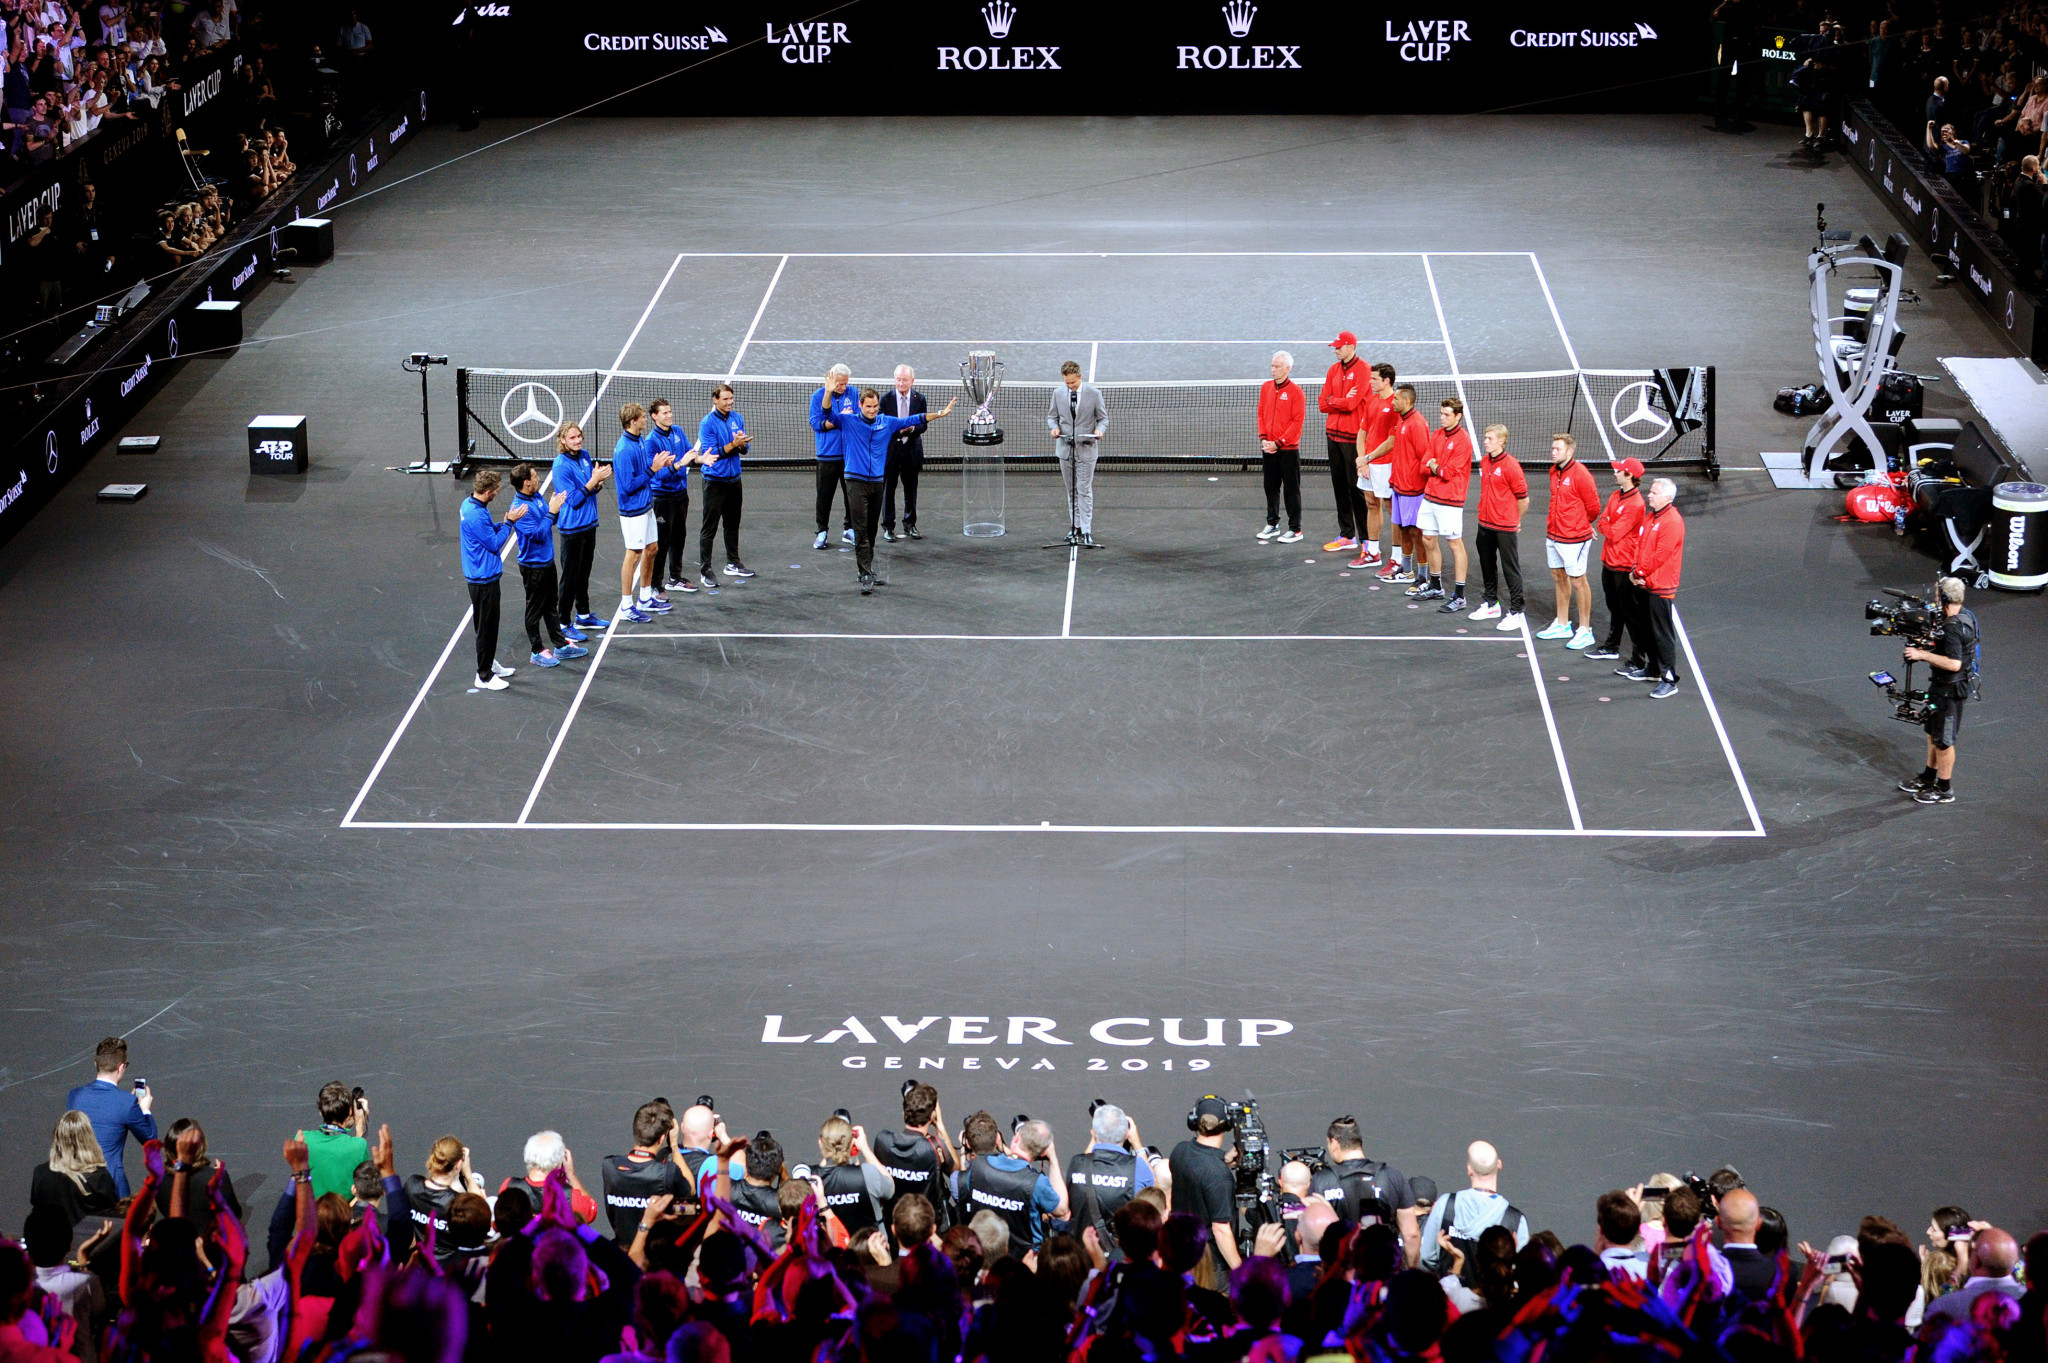 Laver Cup 2022 Schedule London Scheduled To Host 2022 Laver Cup